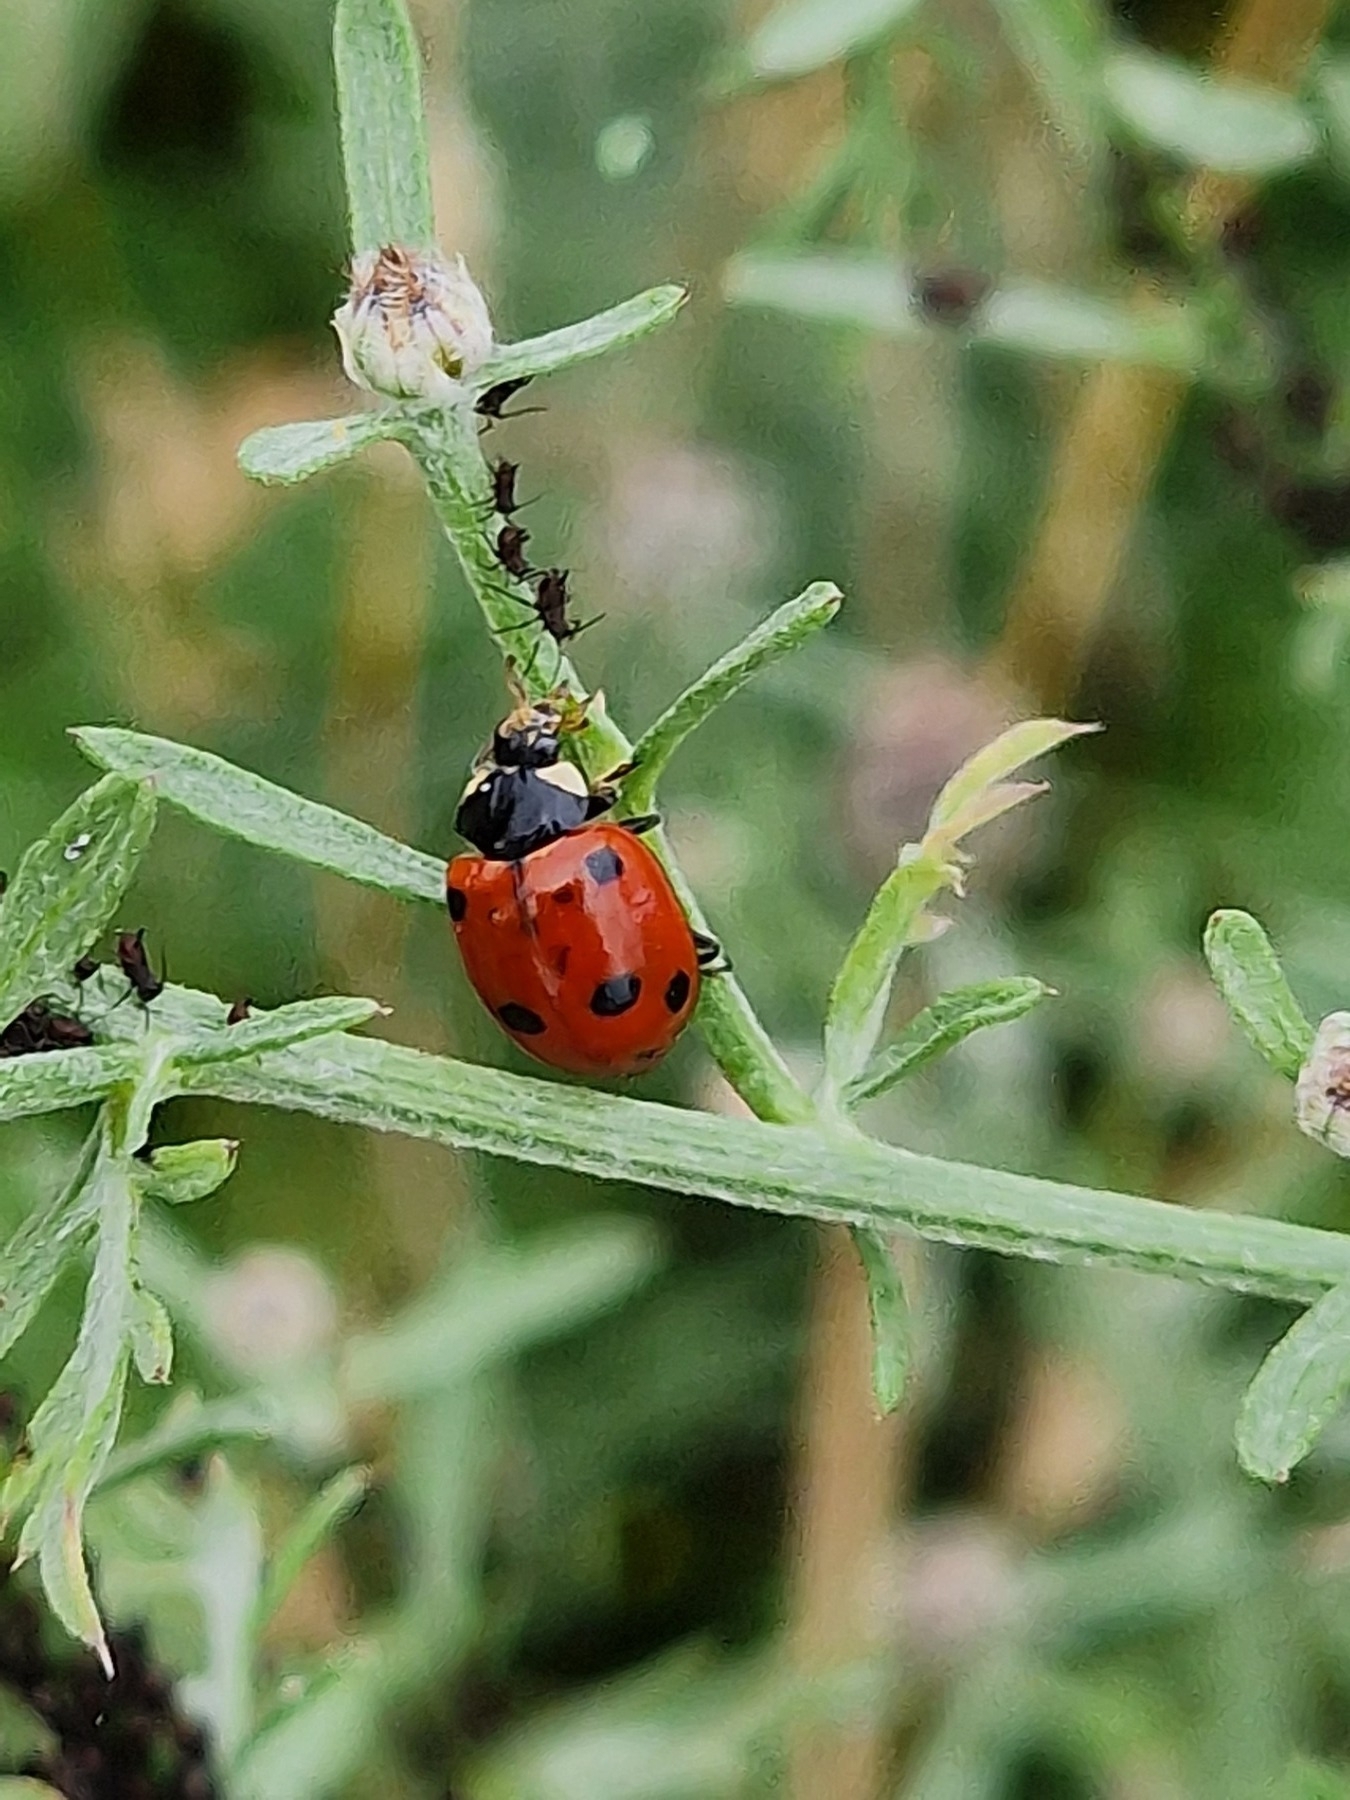 Ladybird on a plant chasing three aphids.